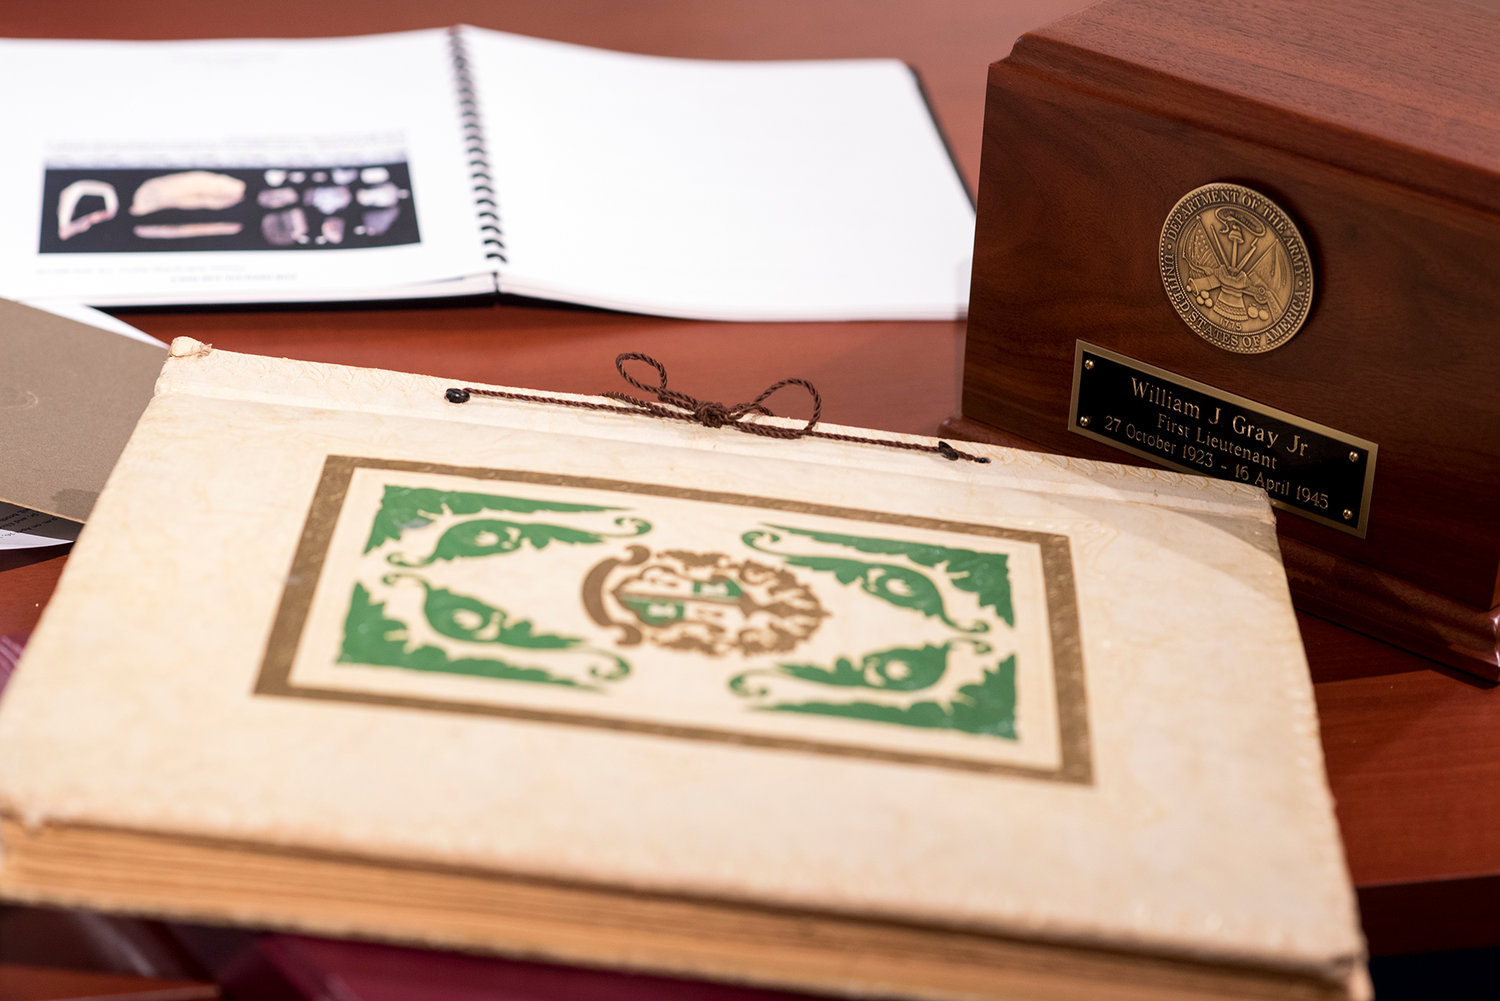 The recently discovered scrapbook containing letters, telegrams and pictures from Army Air Force 1st Lt. William "Bill" James Gray, Jr. sits on a table with an urn that will hold his remains and a forensic anthropology report authored by the the Defense POW/MIA Accounting Agency.